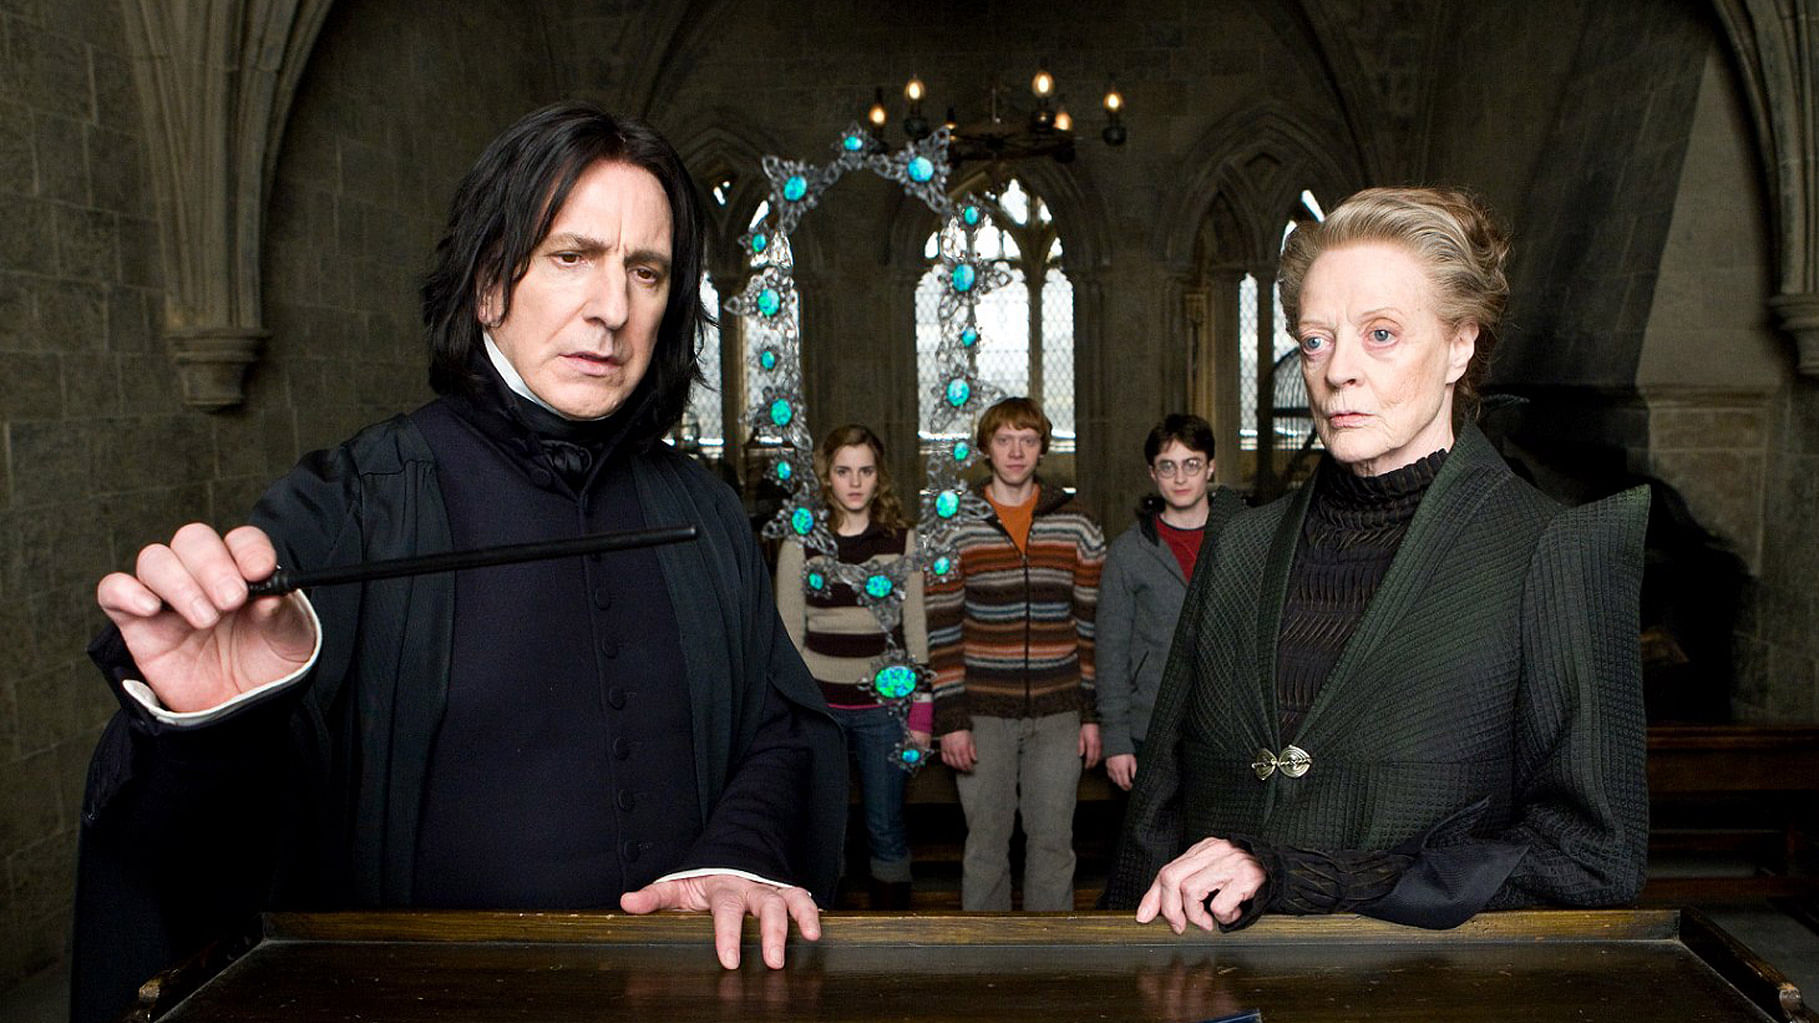 Professor Snape (extreme left), Professor Minerva McGonagall (extreme right), Hermoine, Harry and Ron. (Photo Courtesy: Harry Potter’s <a href="https://www.facebook.com/harrypottermovie/">Official Facebook Page</a>)